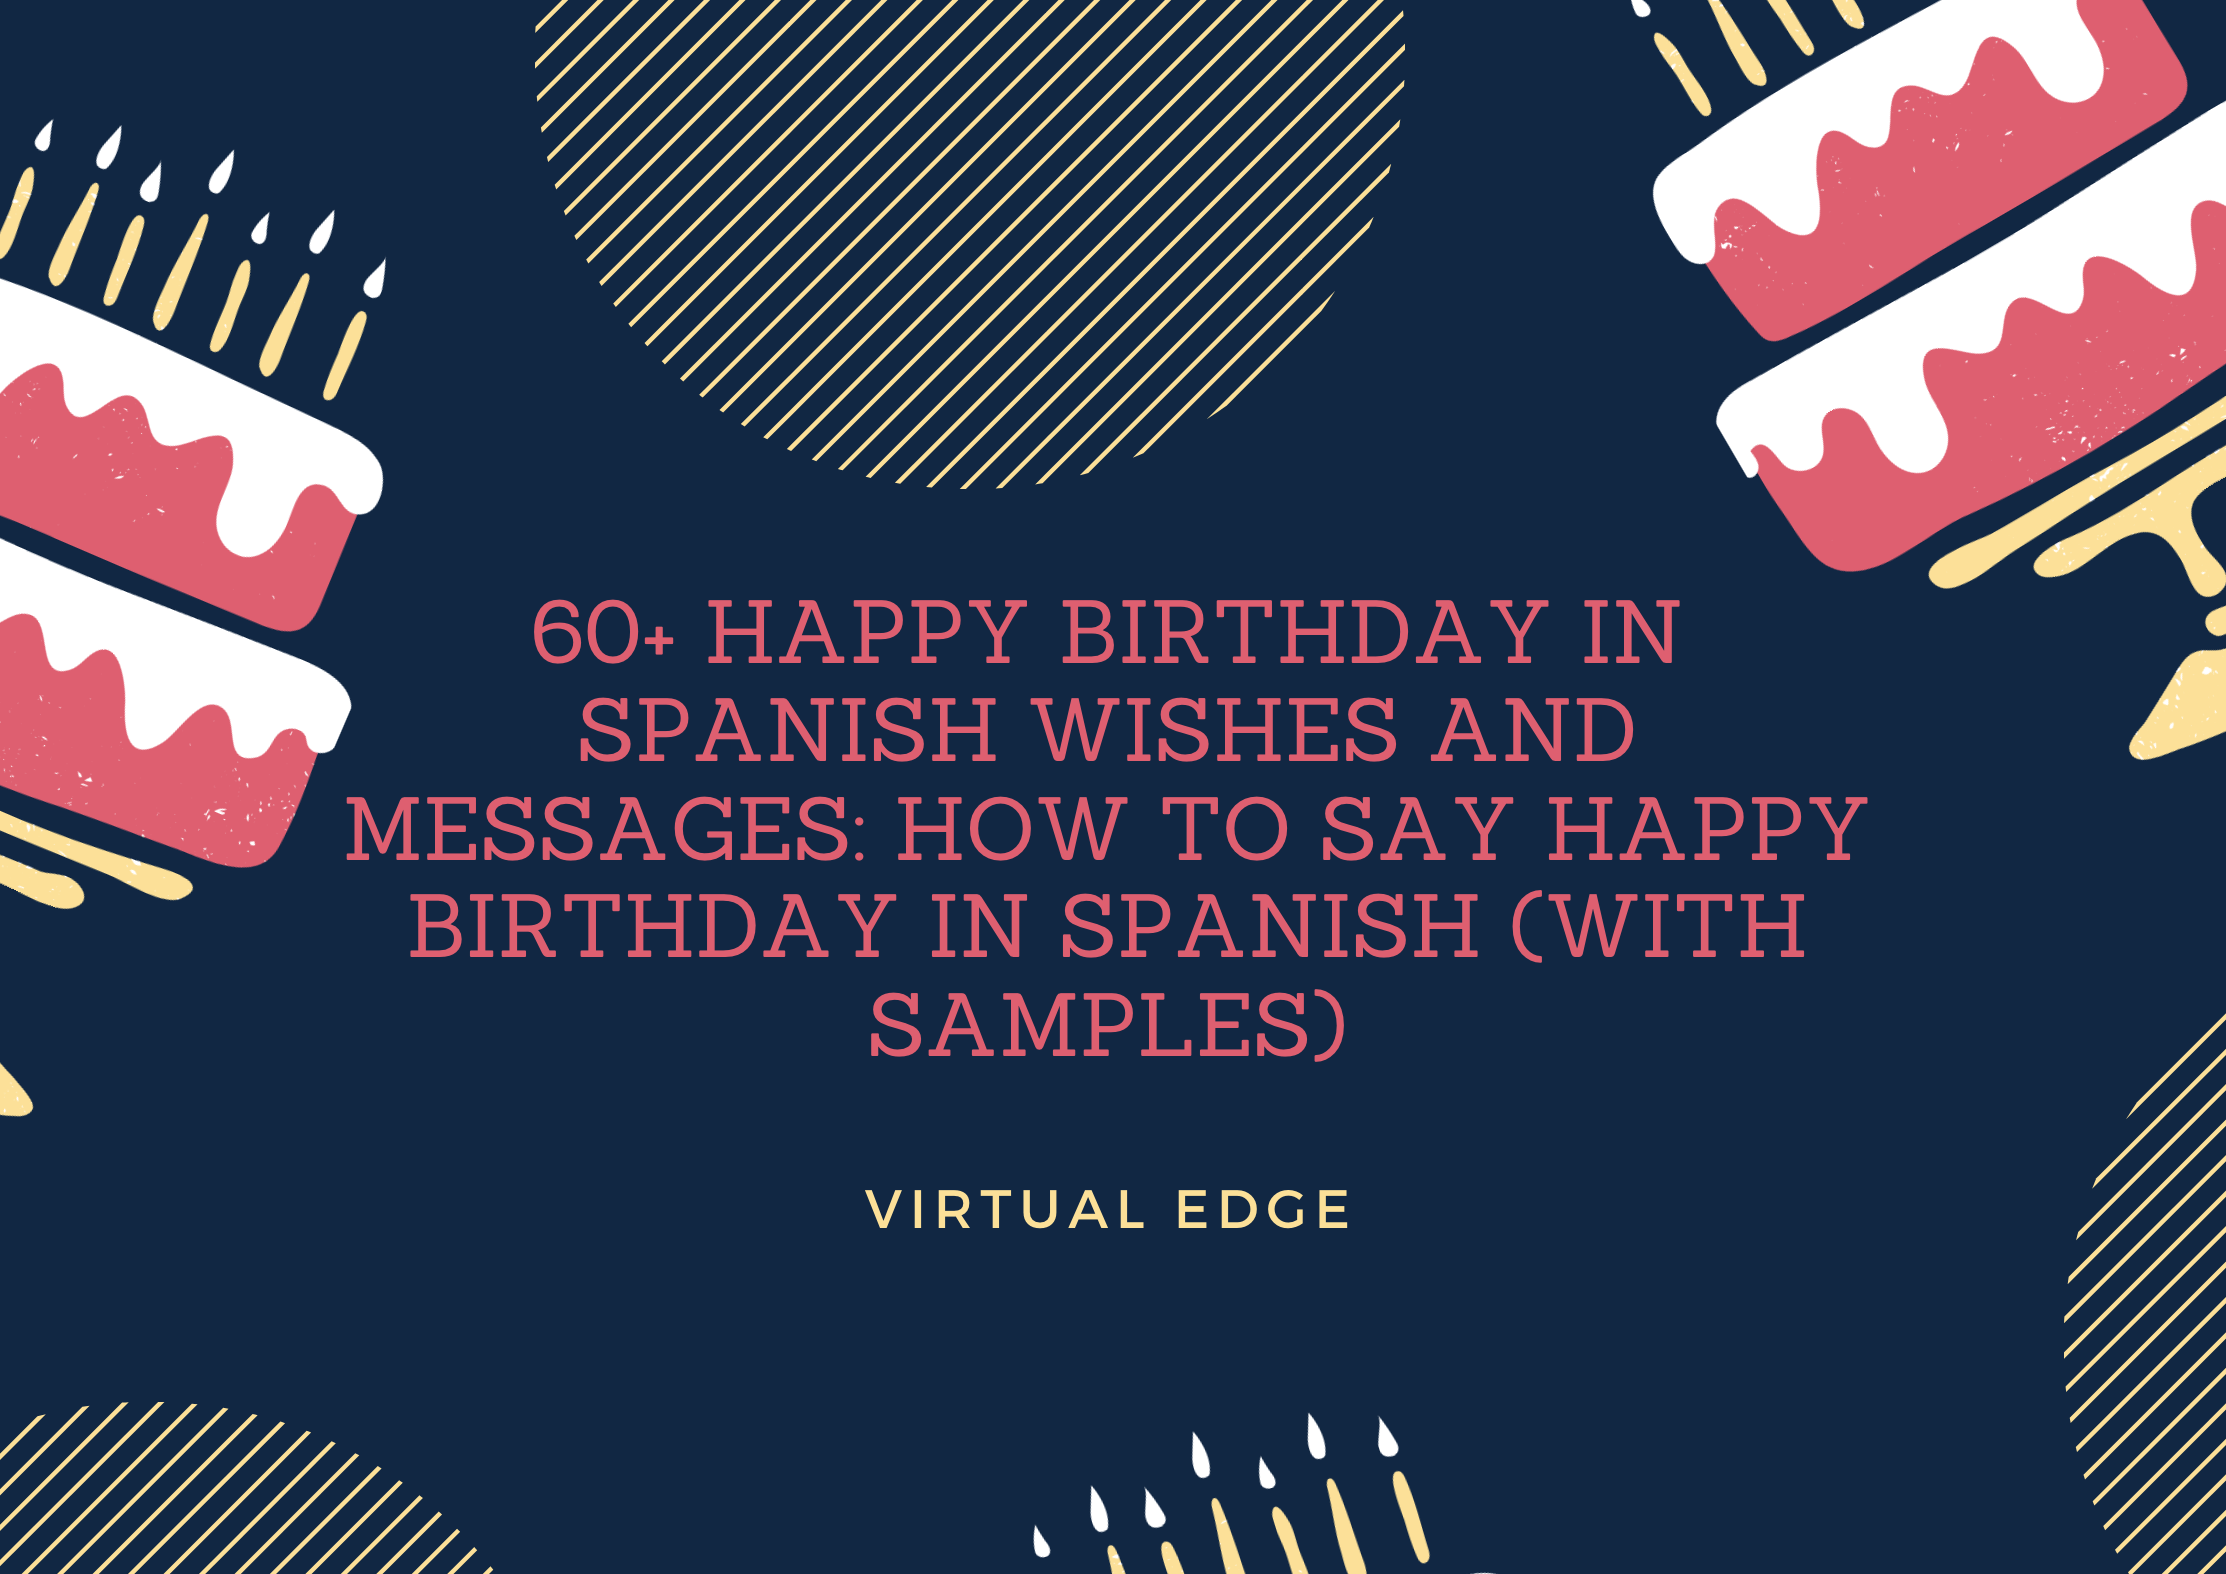 13+ Happy Birthday in Spanish Wishes and Messages: How to Say